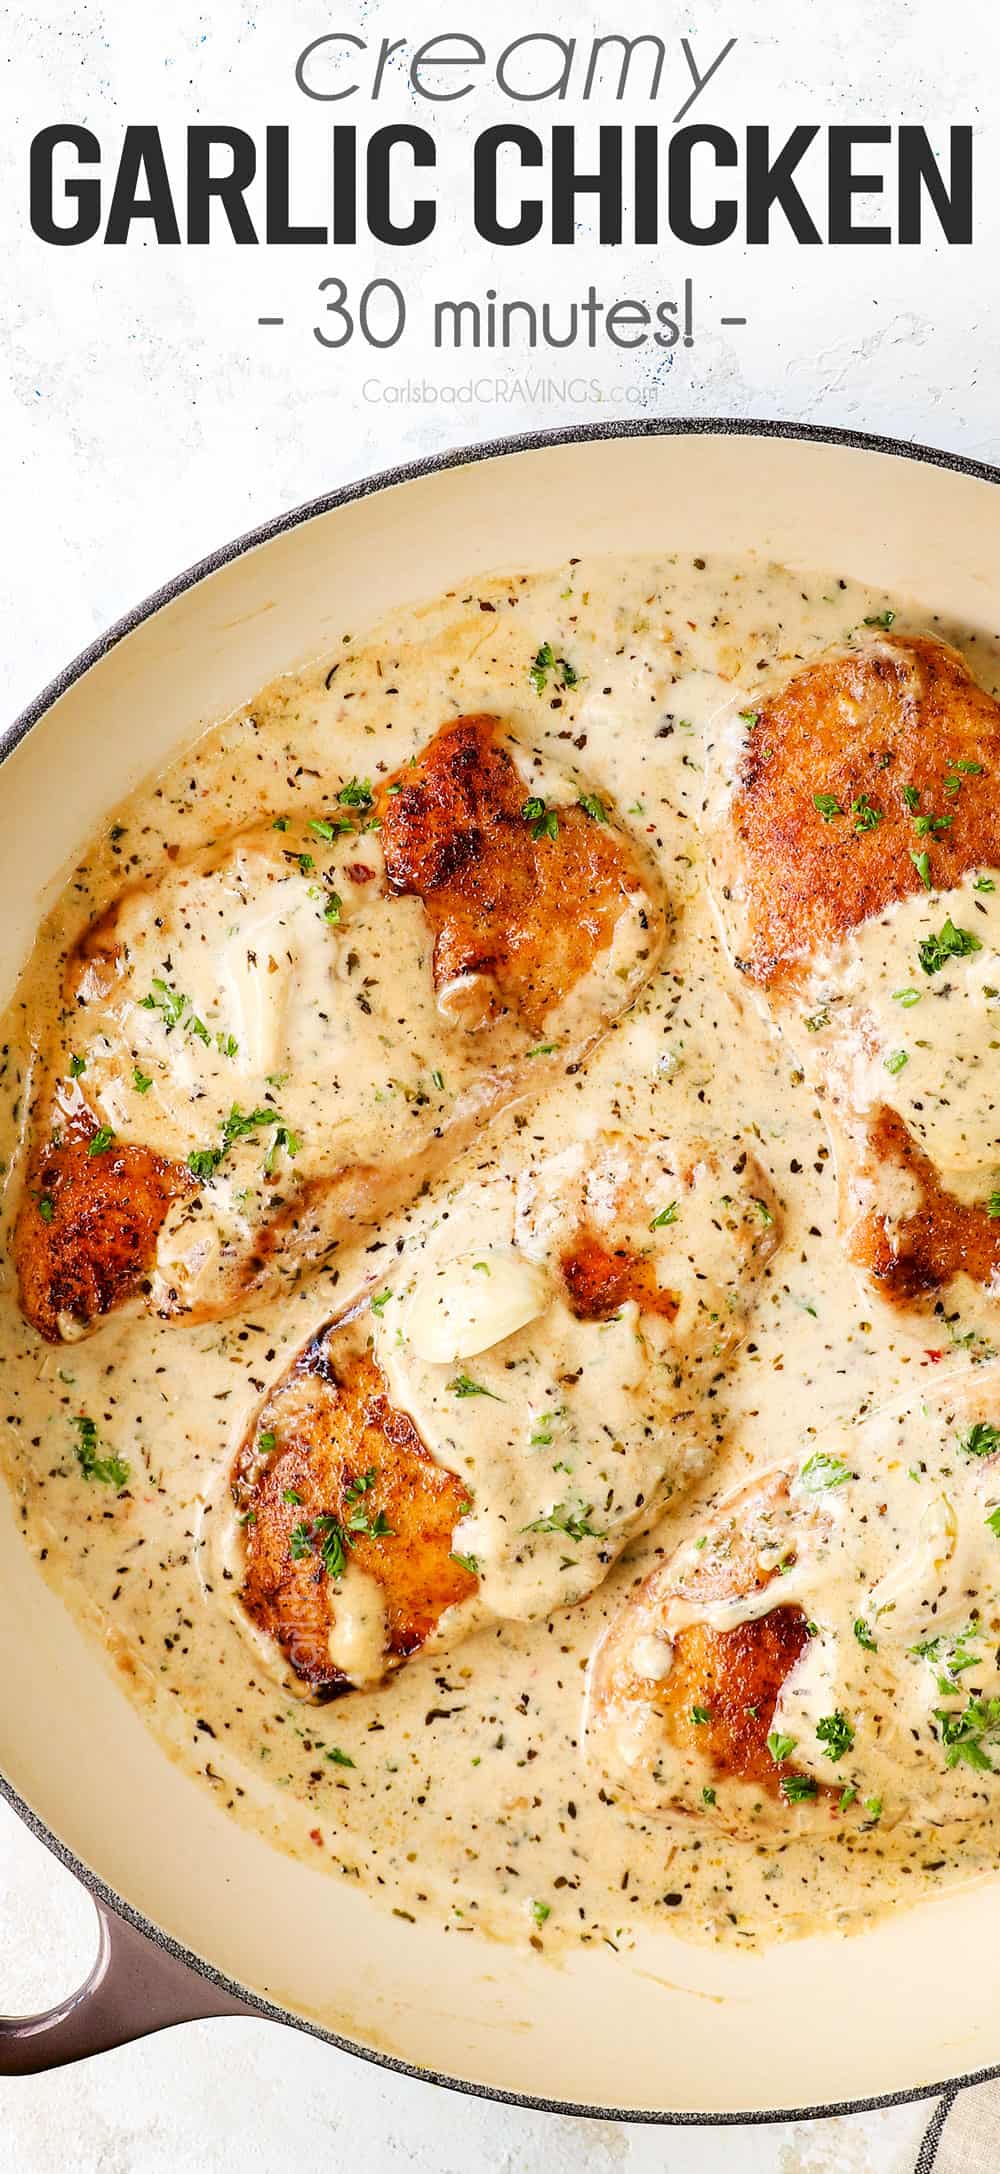 creamy garlic parmesan chicken in a skillet with Parmesan sauce garnished with parsley